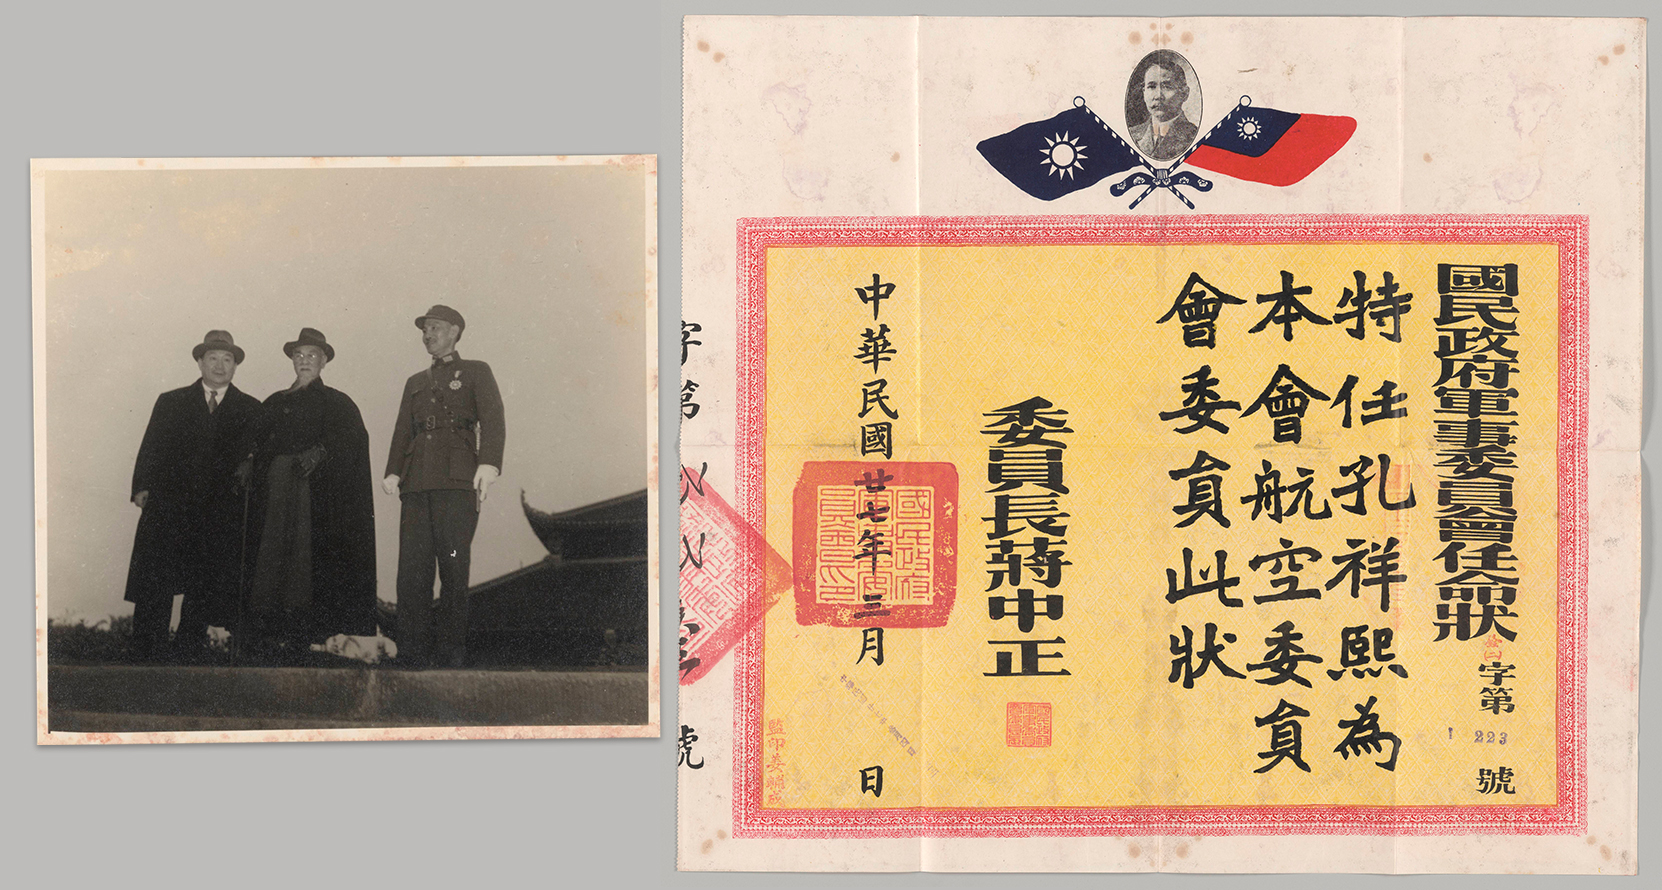 Photograph of KMT leaders and document from Kung papers